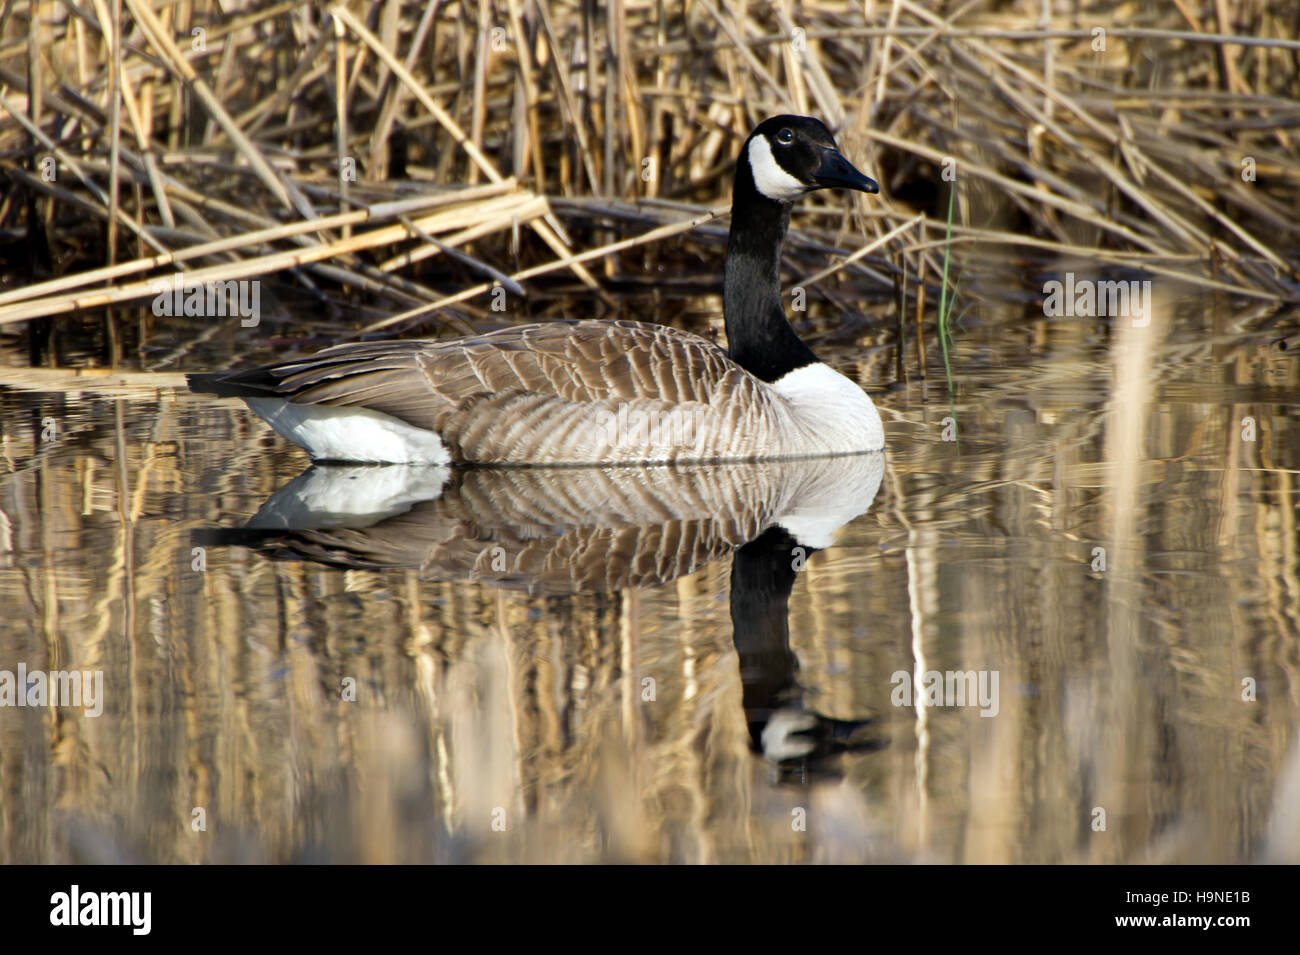 The Canada Goose (Branta canadensis) floating on a calm watersurface with old reed in background. Stock Photo